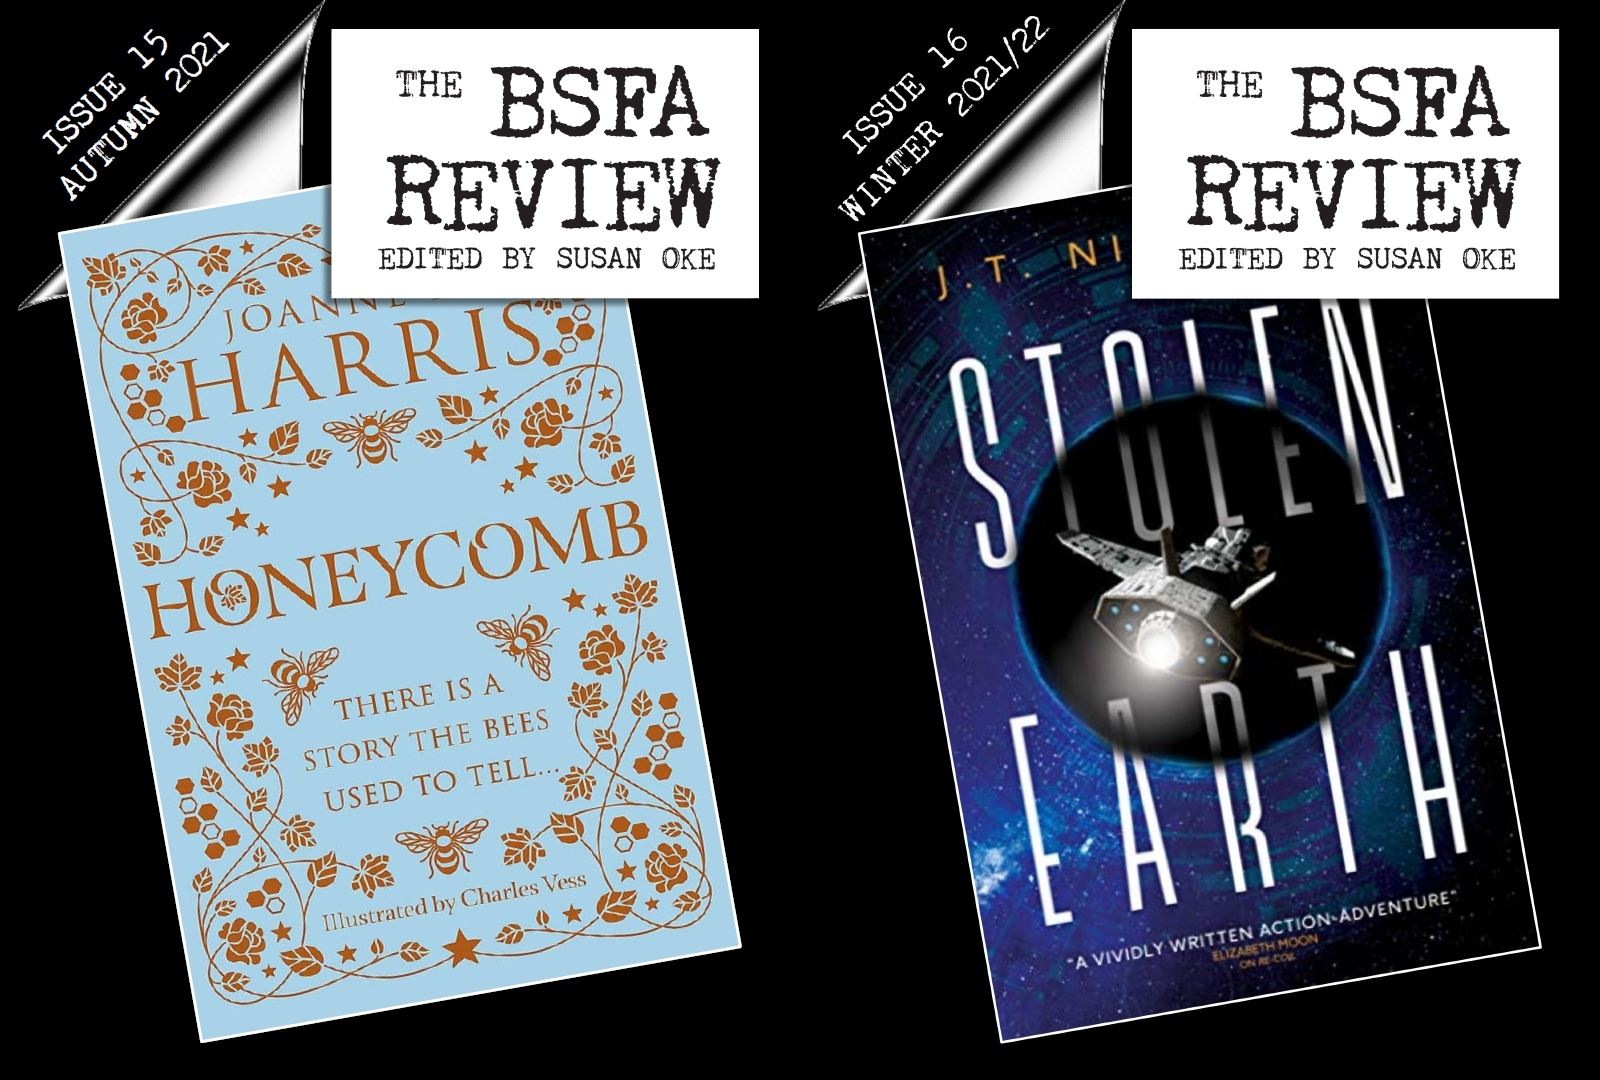 The BSFA Review 15 and 16